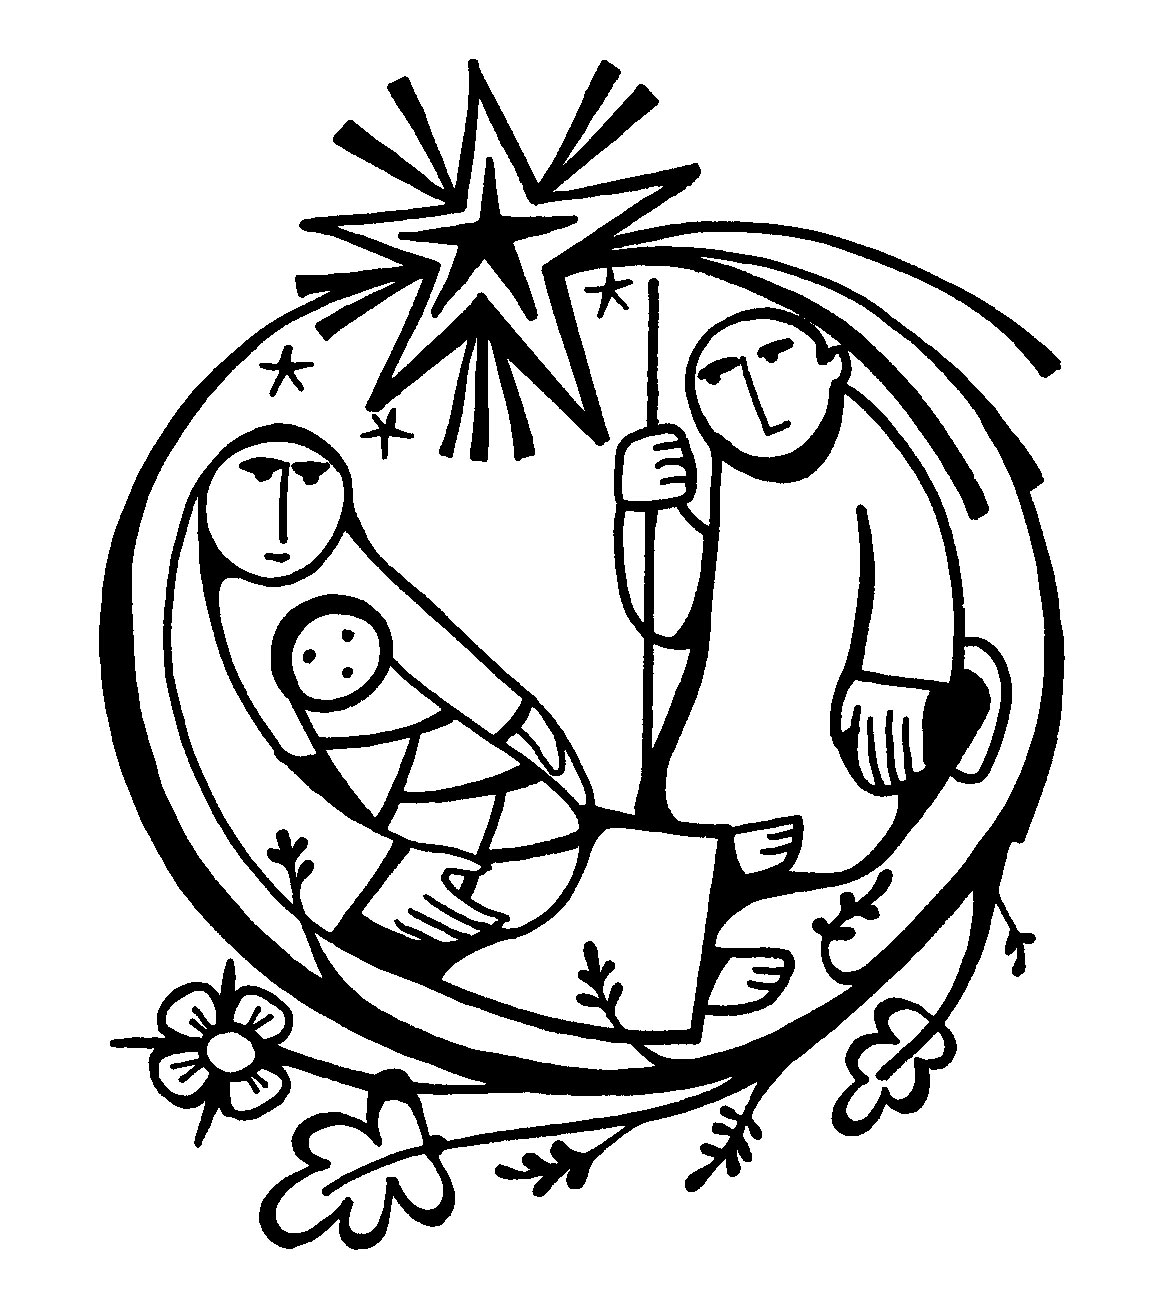 free clipart images of baby jesus - photo #37